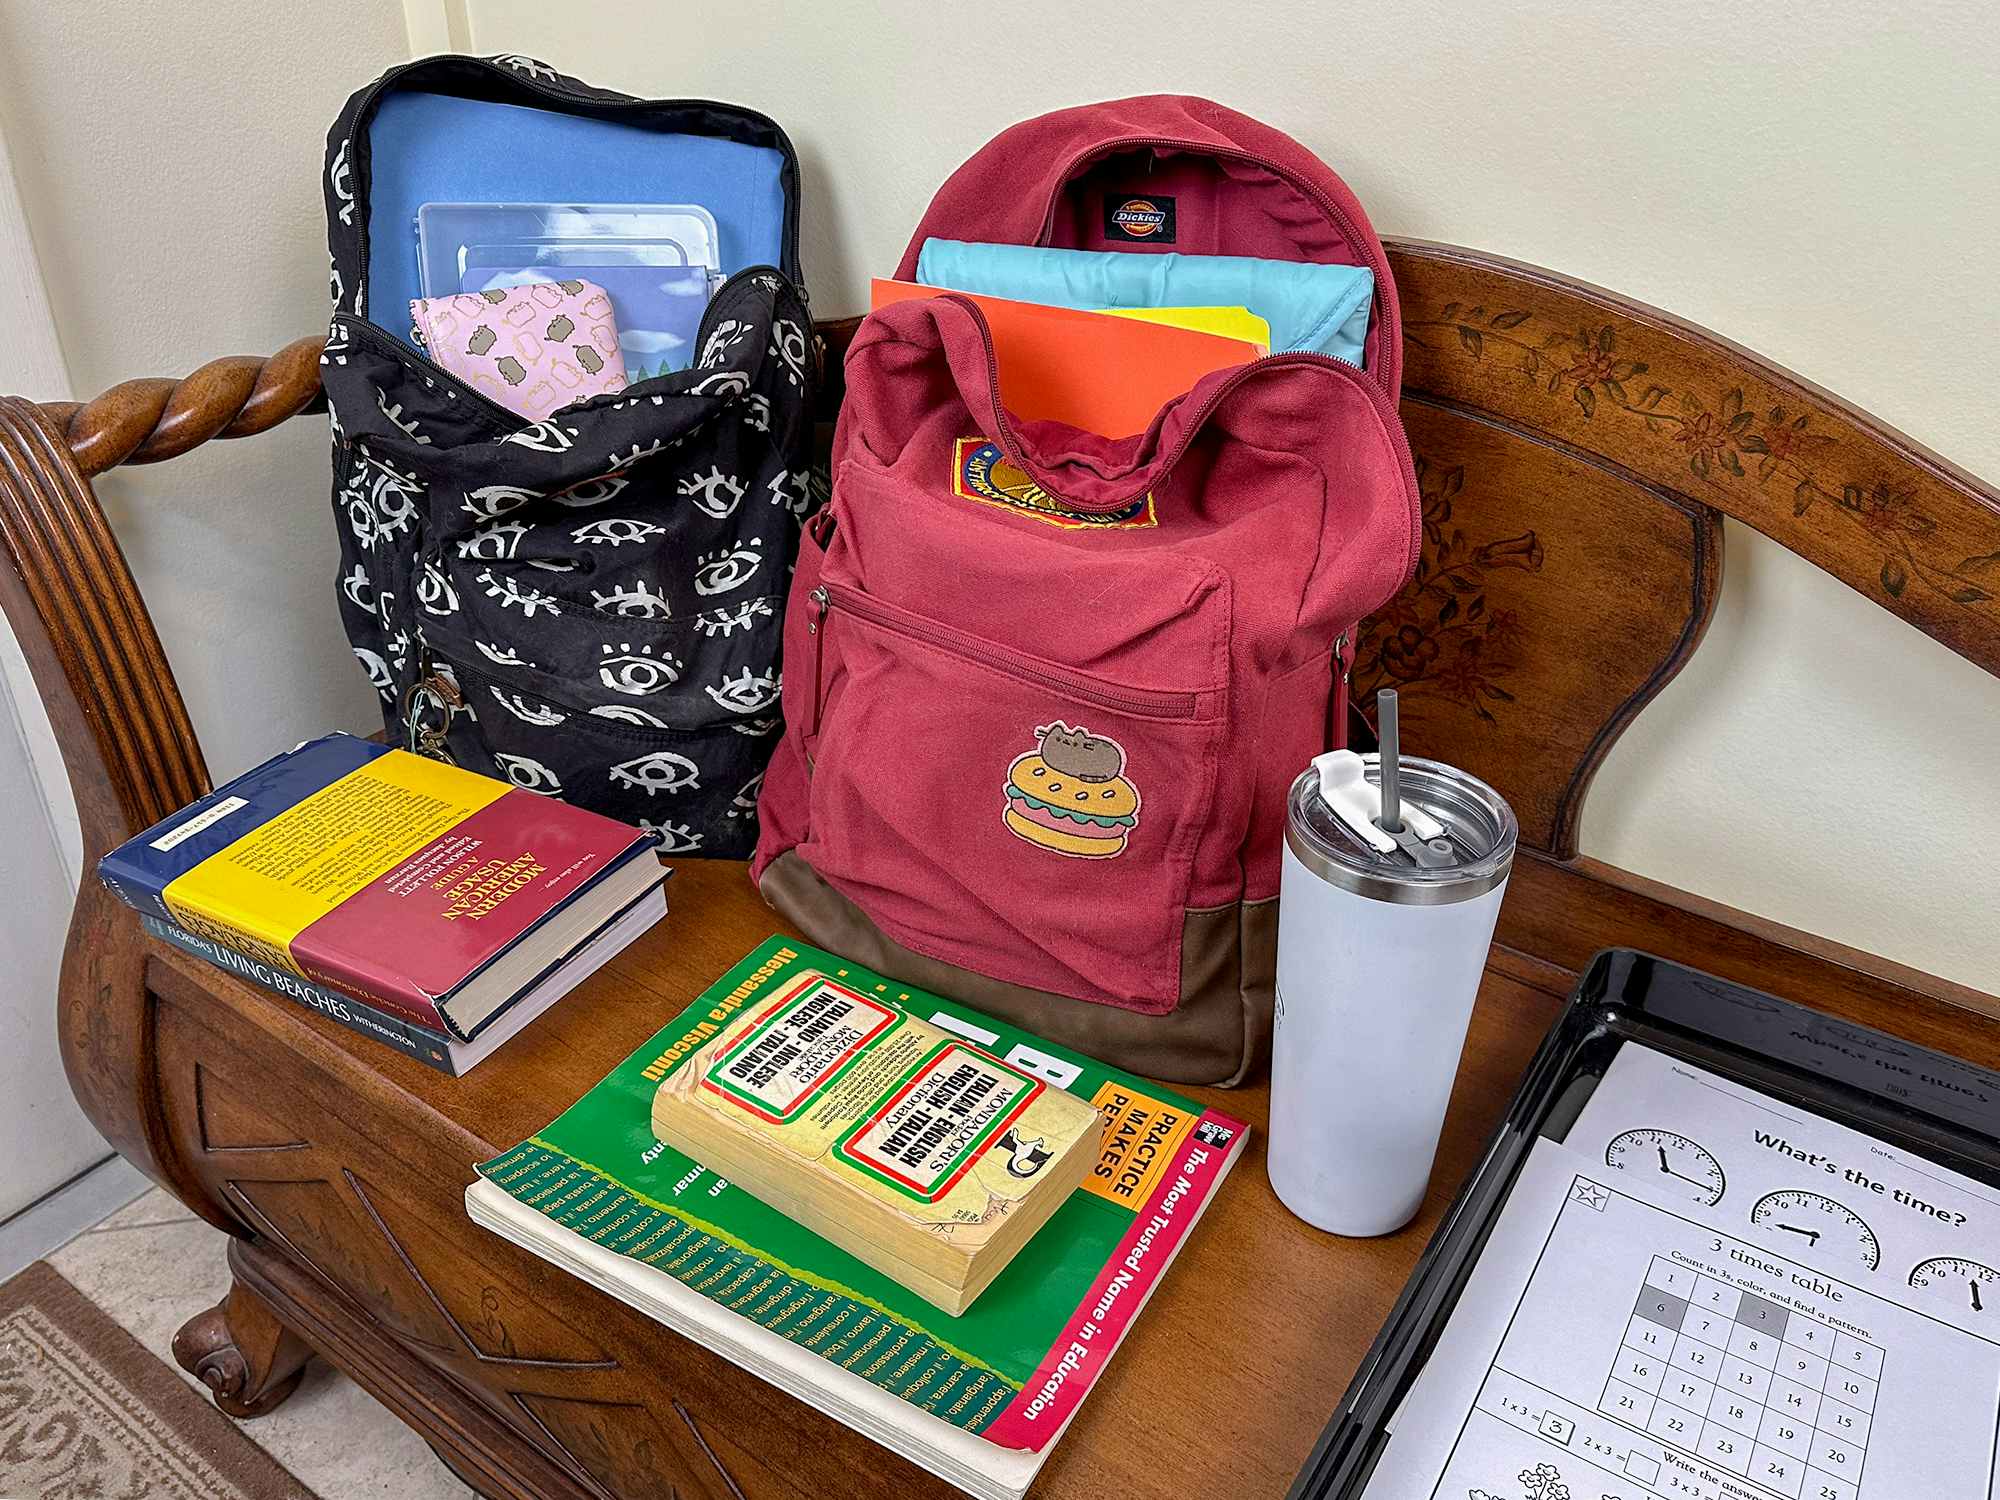 https://prod-cdn-thekrazycouponlady.imgix.net/wp-content/uploads/2016/07/cheap-easy-school-organization-ideas-command-center-books-assignments-backpacks-designated-space-kcl-lp-1691790267-1691790267.jpg?auto=format&fit=fill&q=25